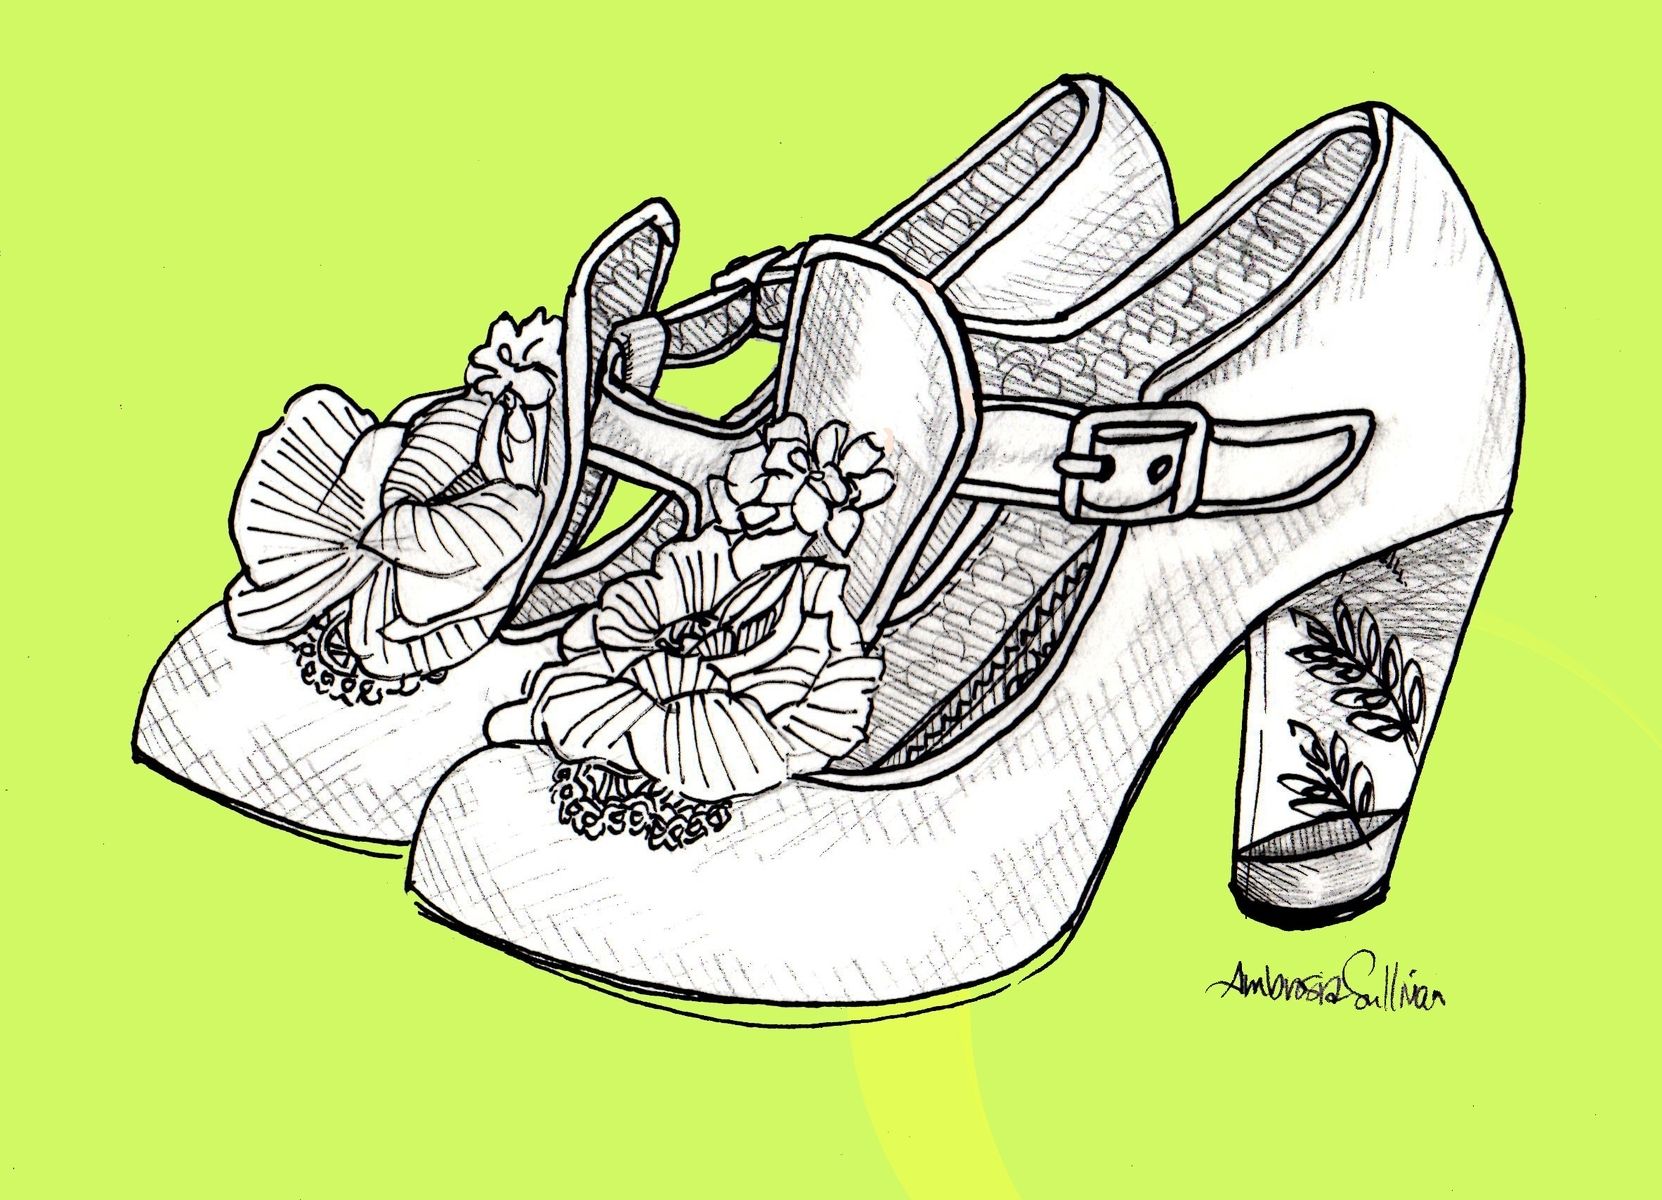 Hand Made Shoe Drawings/Illustrations by Ambrosia Sullivan